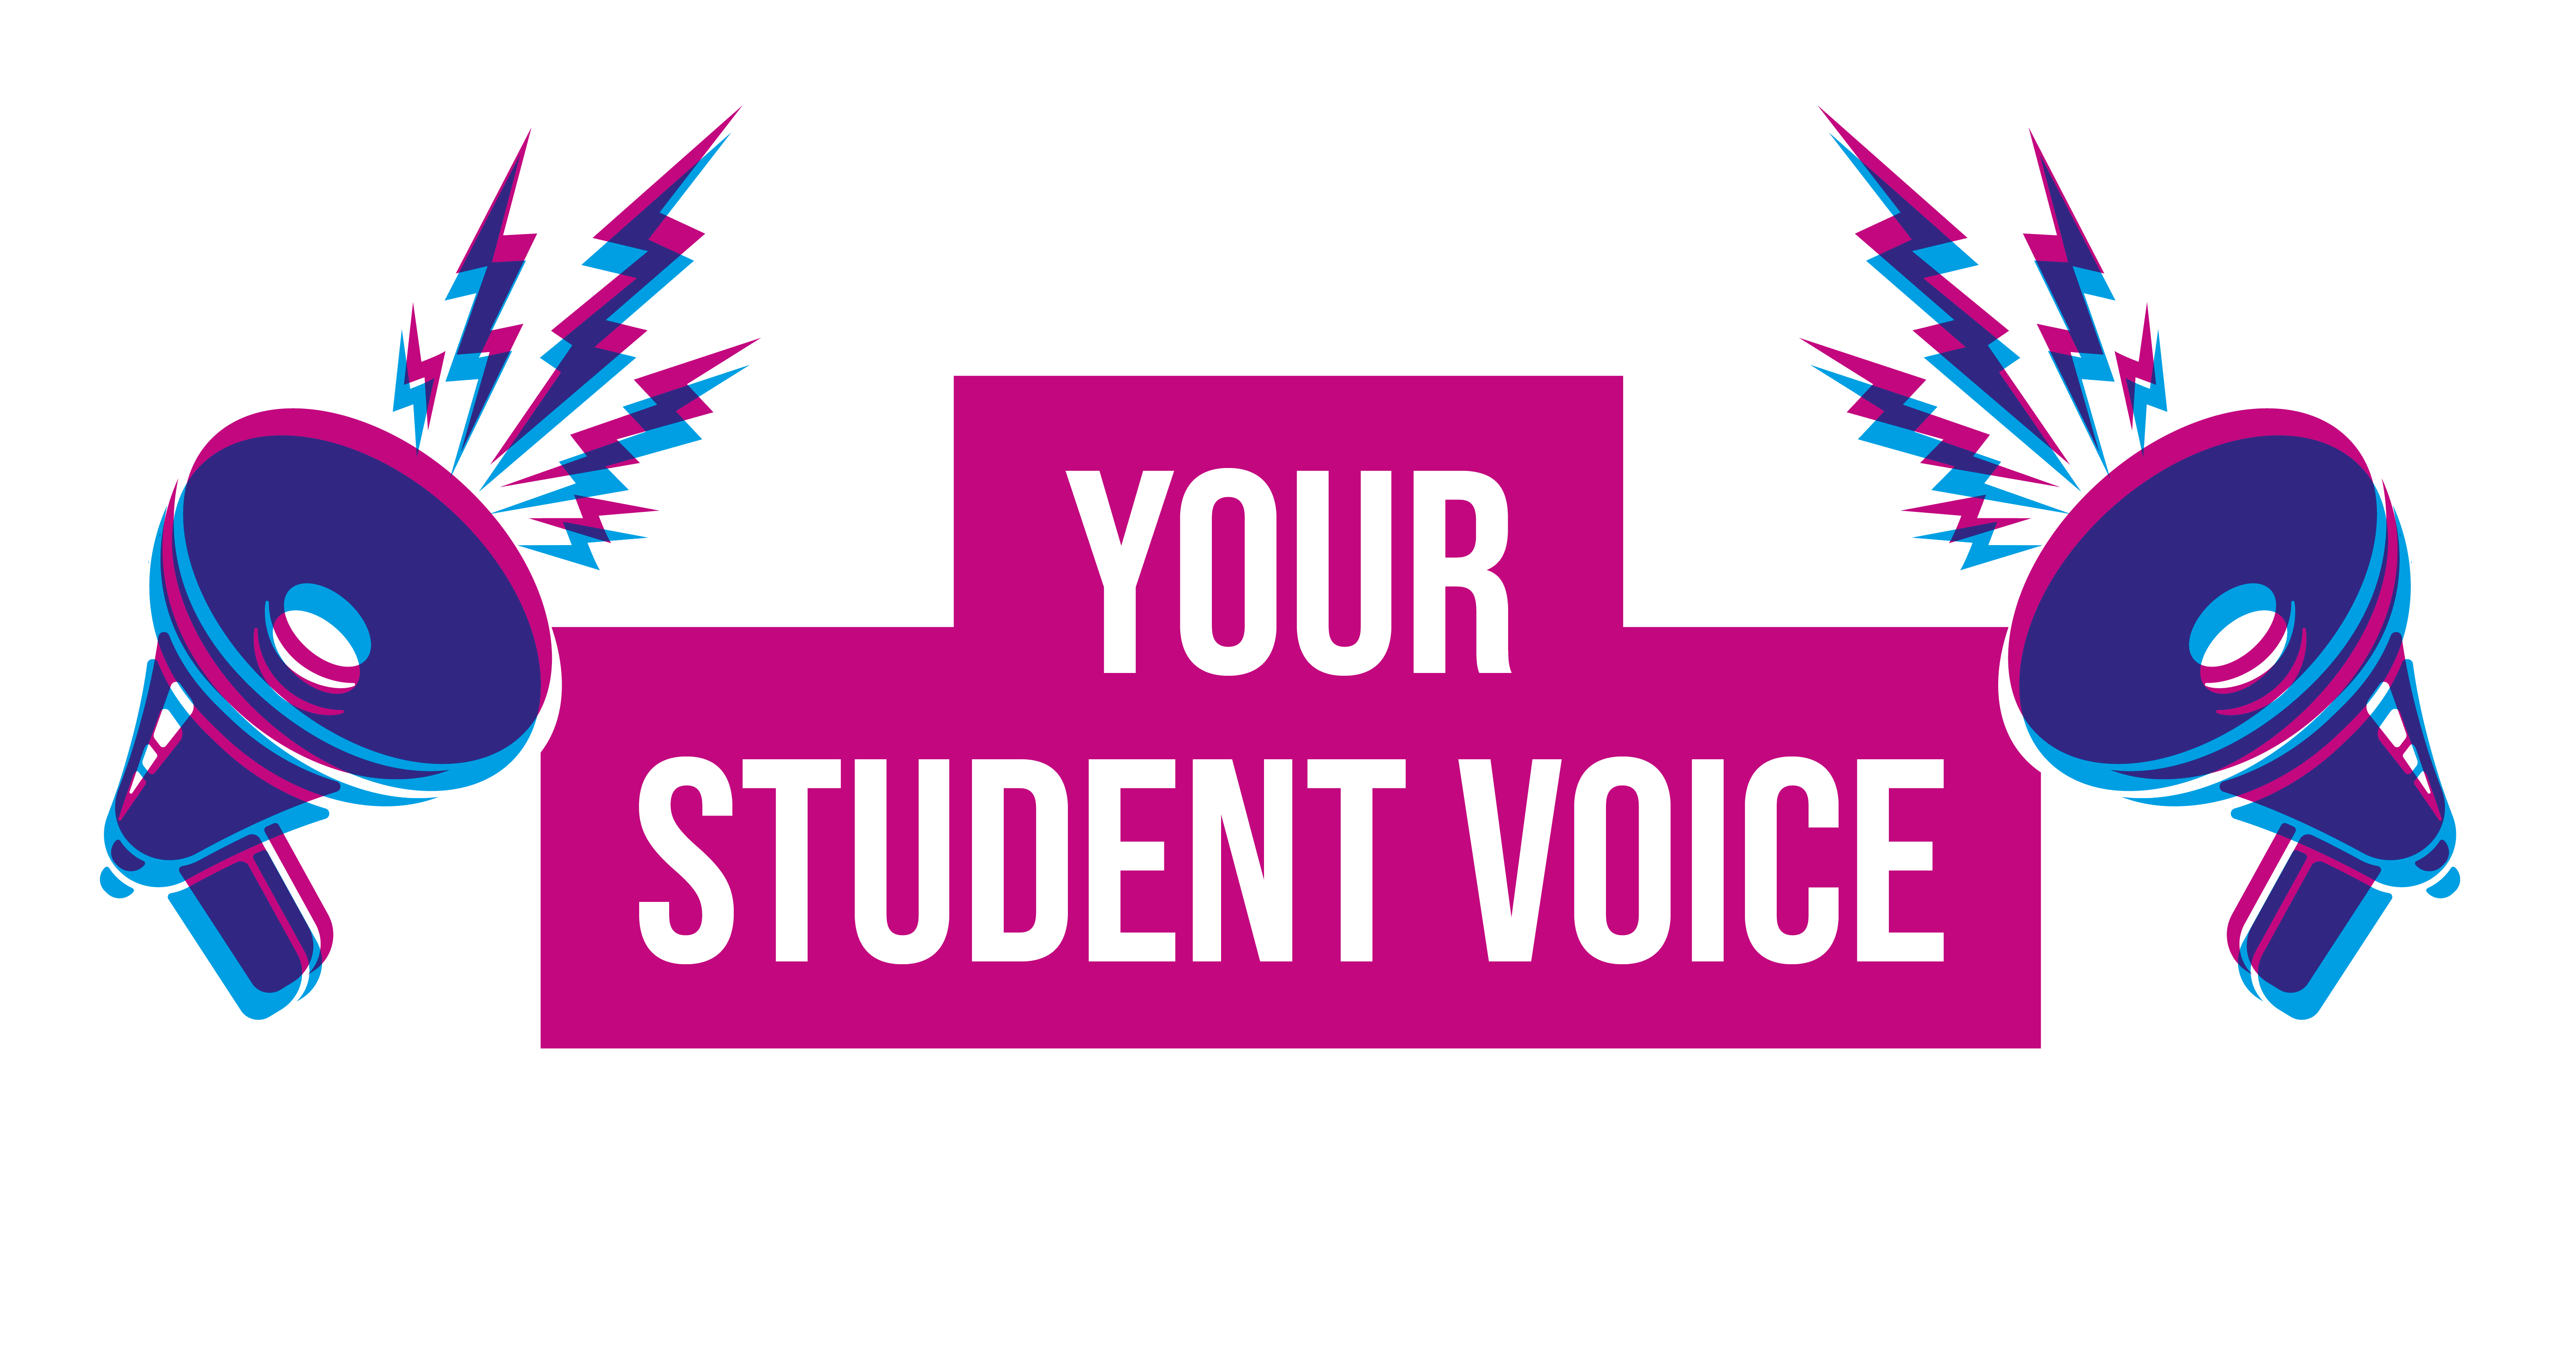 Your student voice.